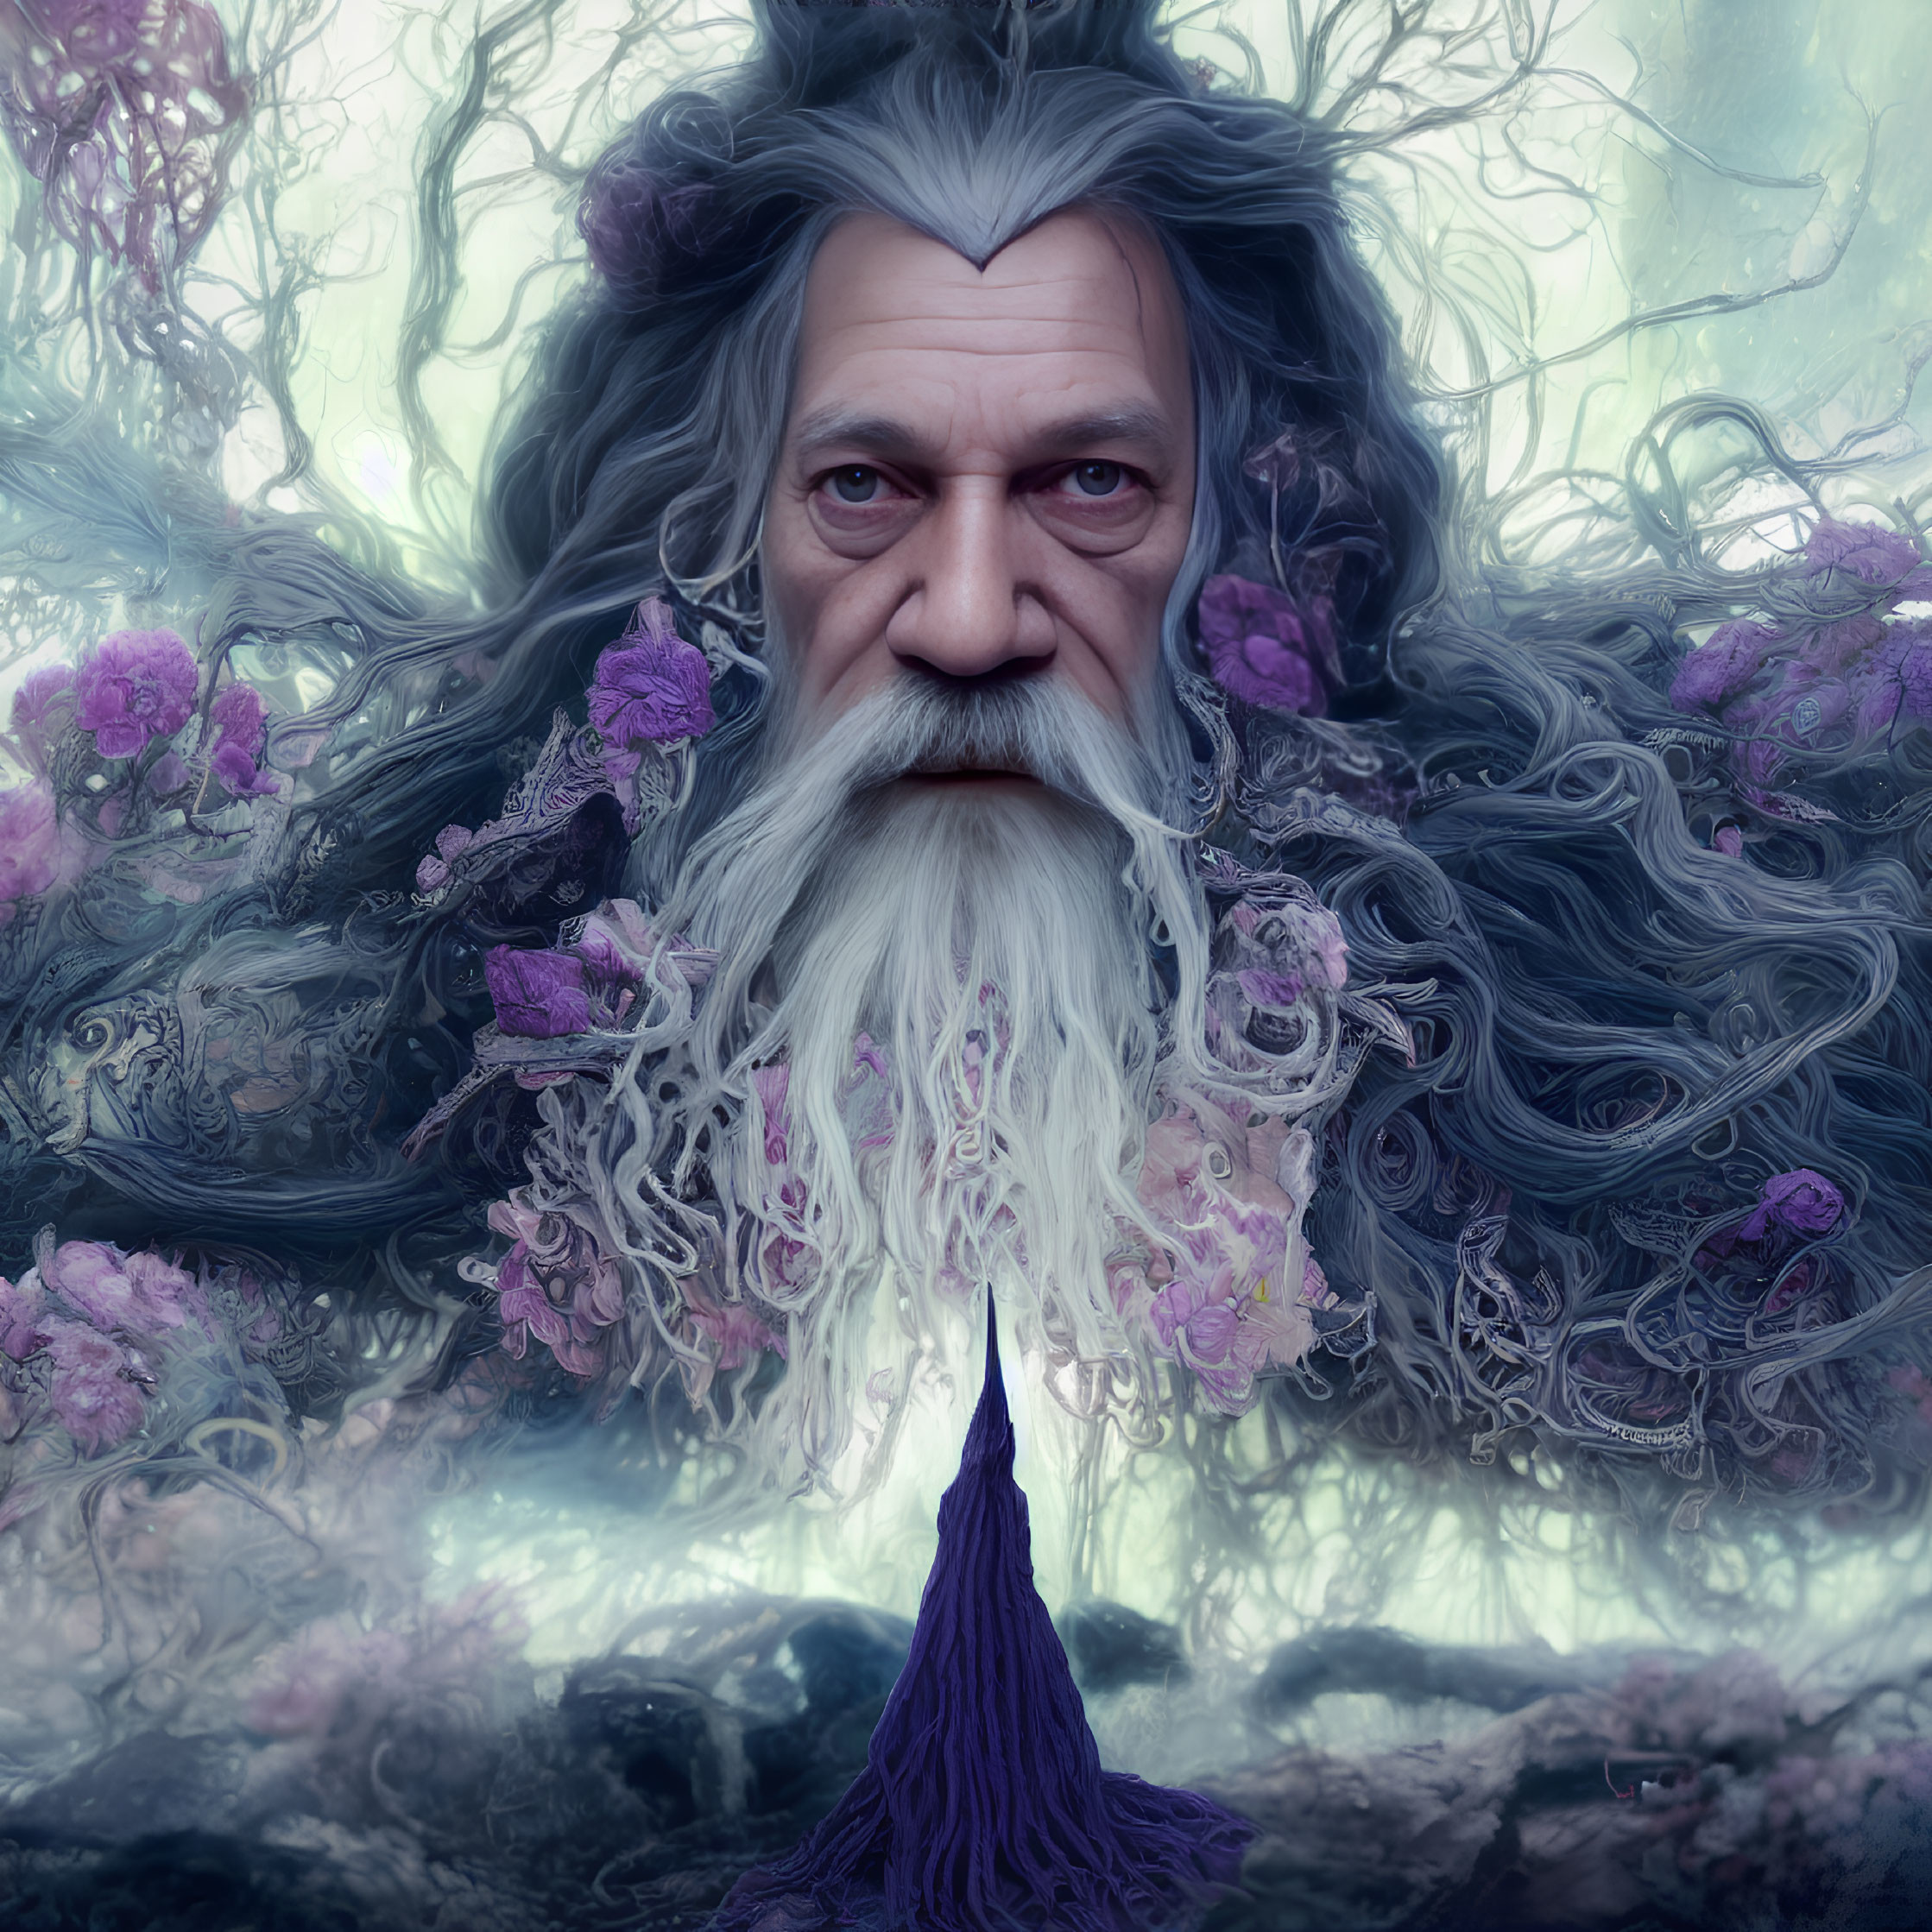 Elderly Man with Intricate Beard in Mystical Forest Setting